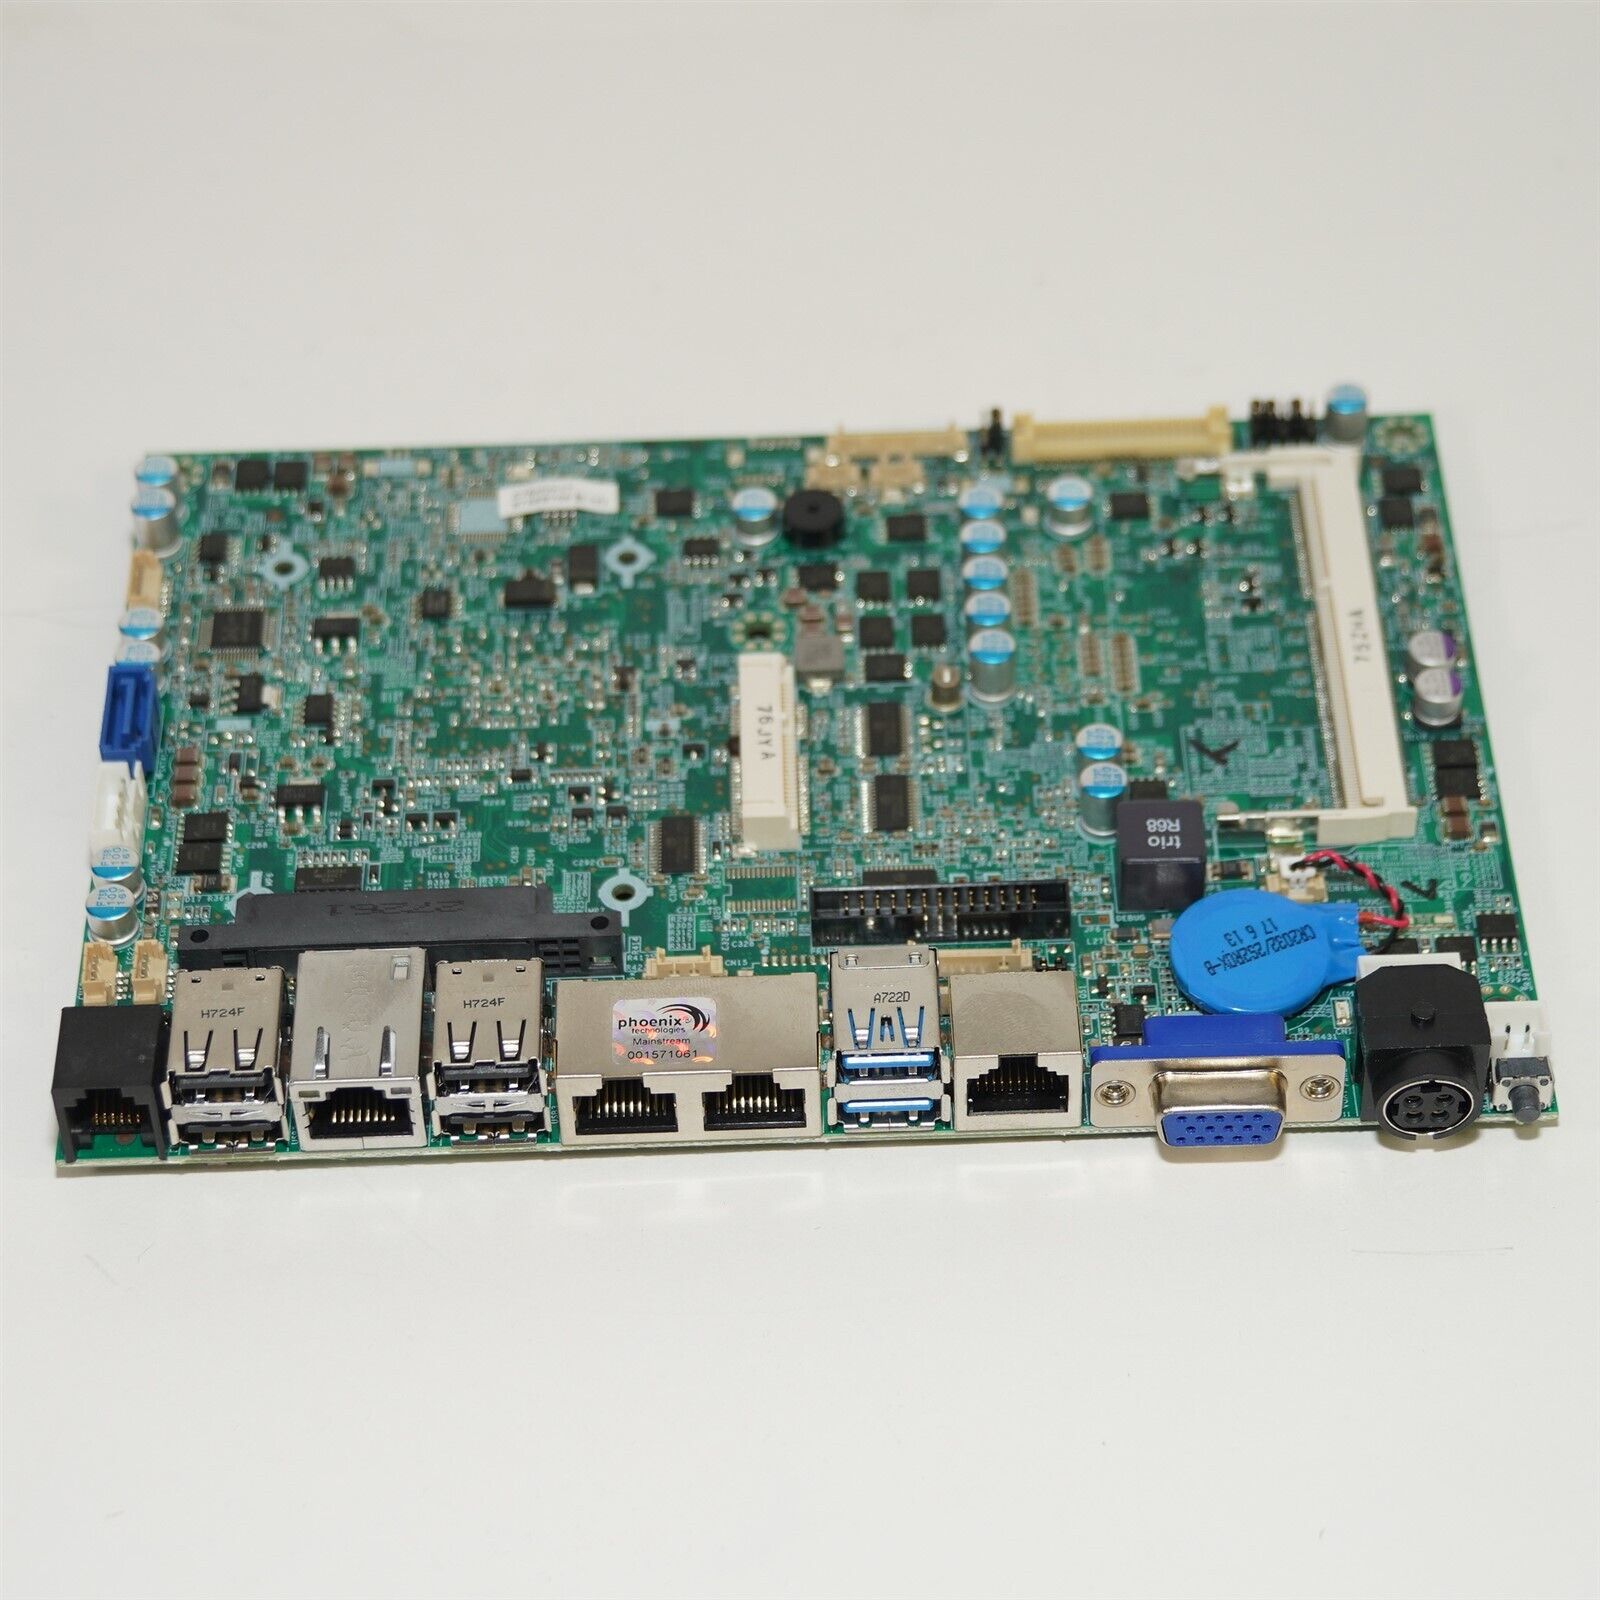 Poindus ToriPRO 715/815 POS Main System Board Motherboard with i3-3217U 1.8GHz 